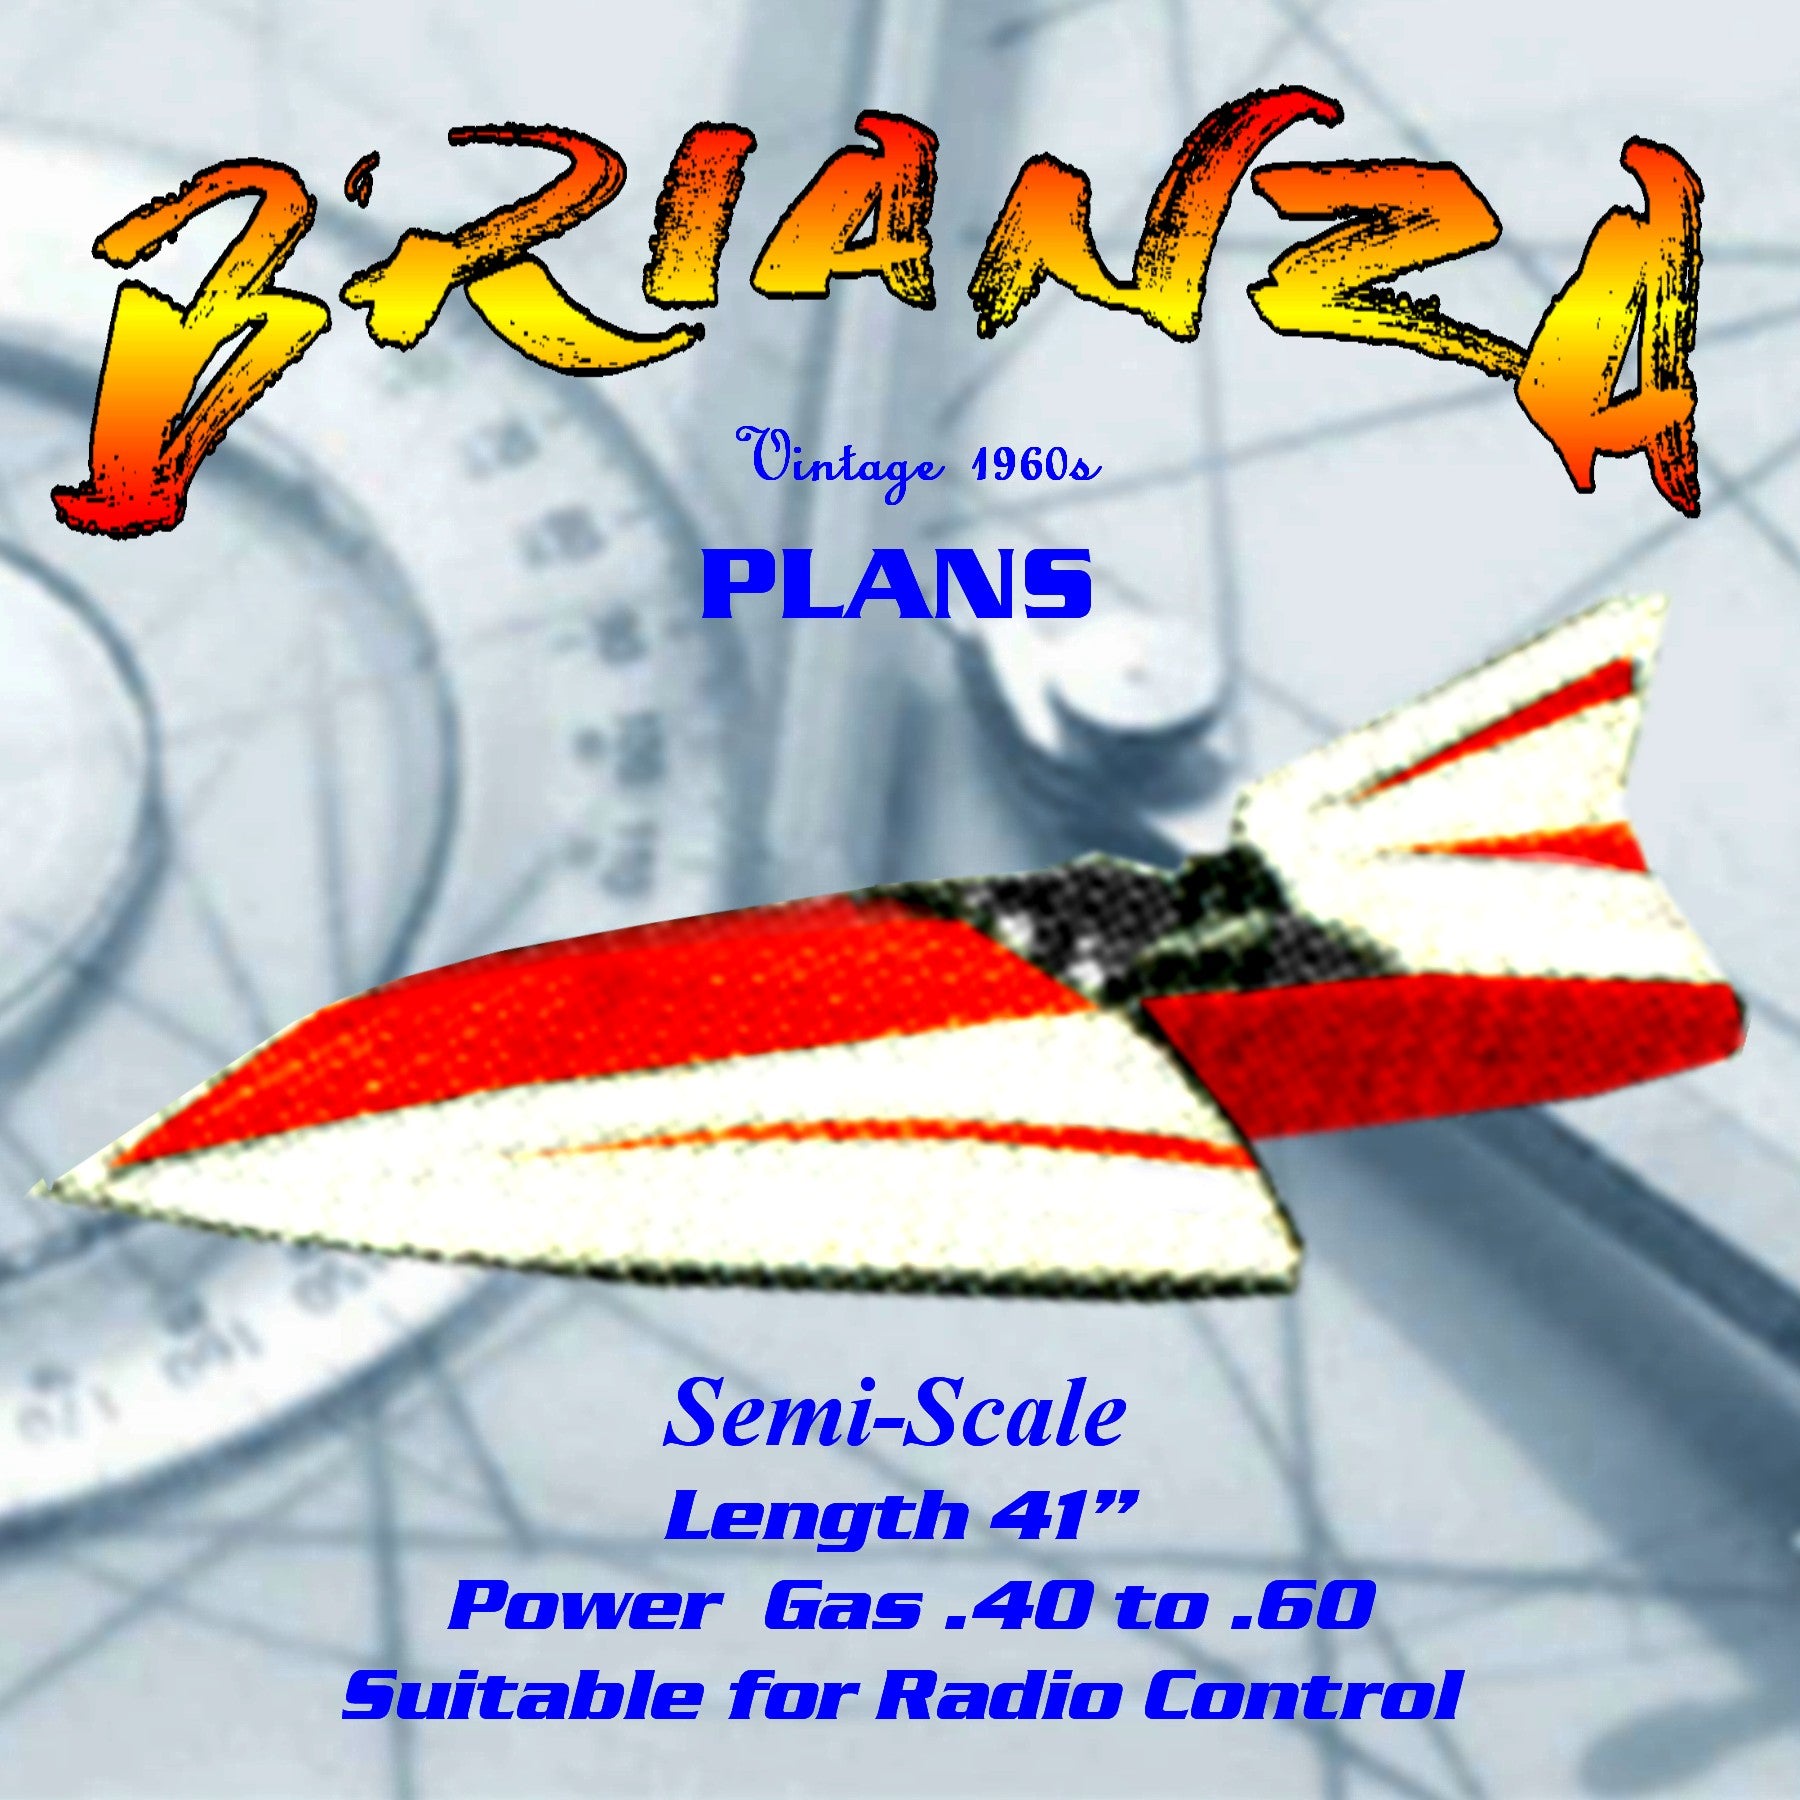 full size printed plan a three-point r/c hydroplane "brianza" derived from slo-mo-shun